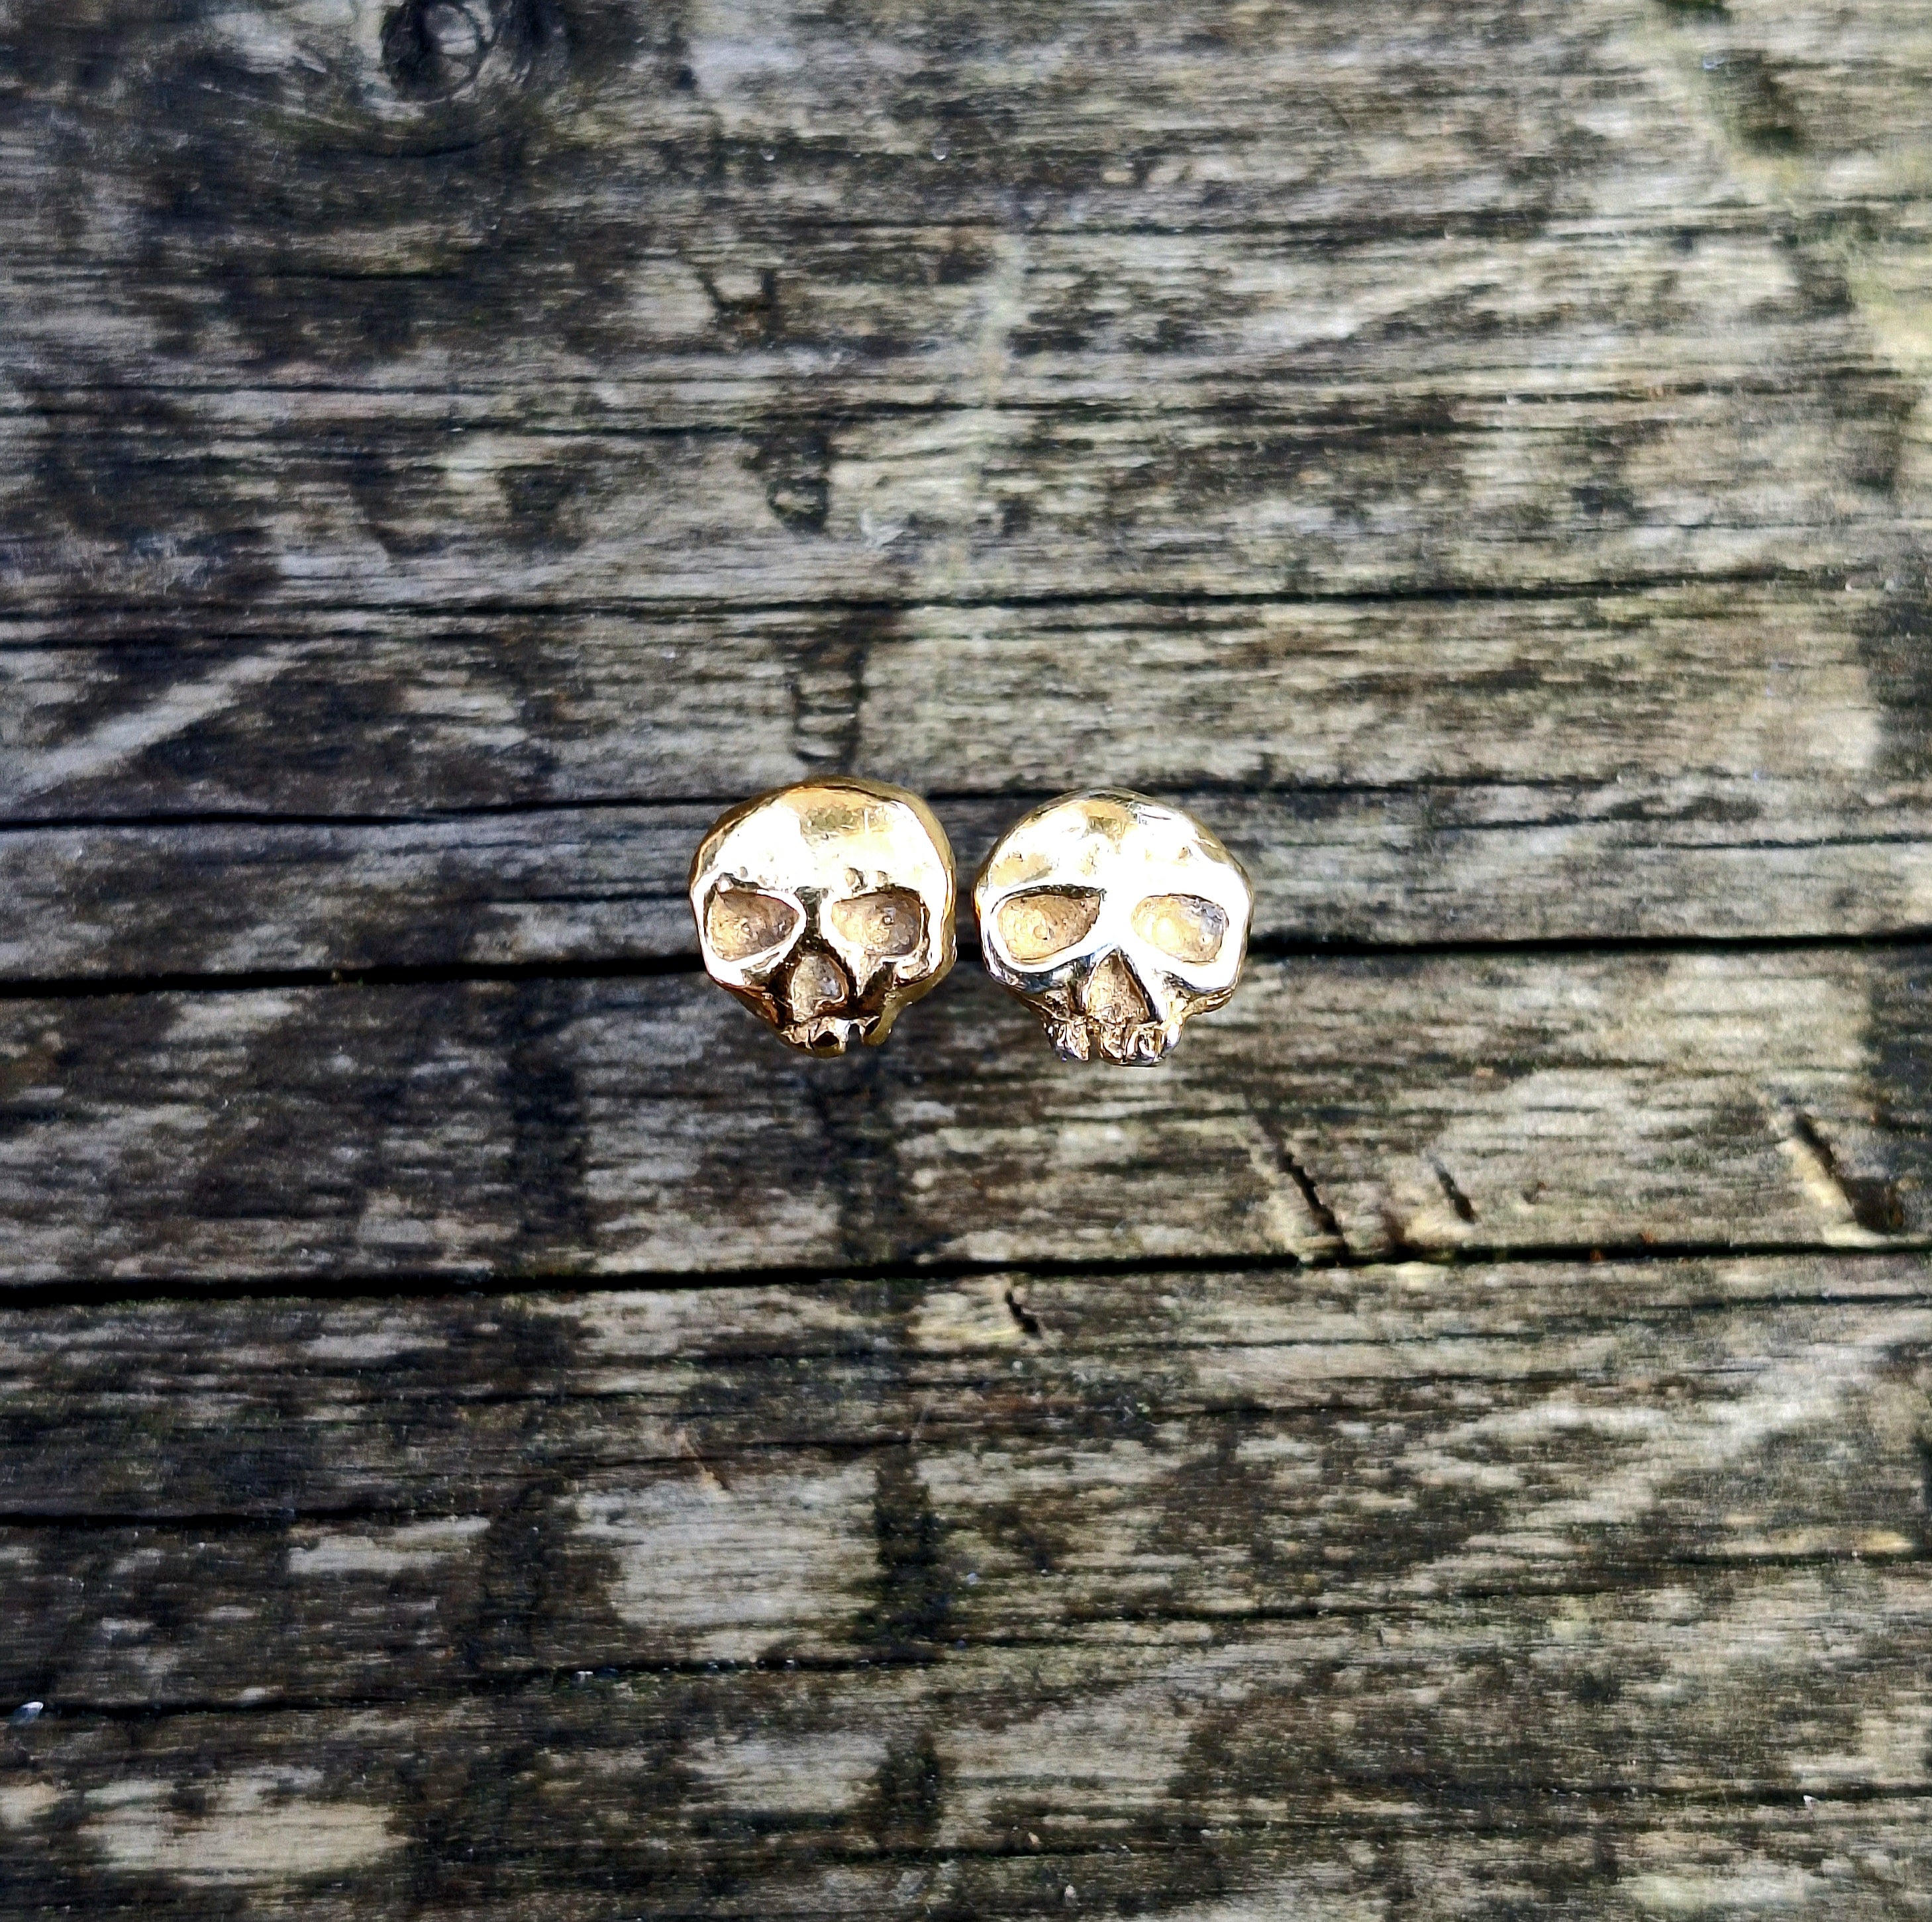 Skulls Of My Exes Earrings - Gold Plated and Sterling Silver